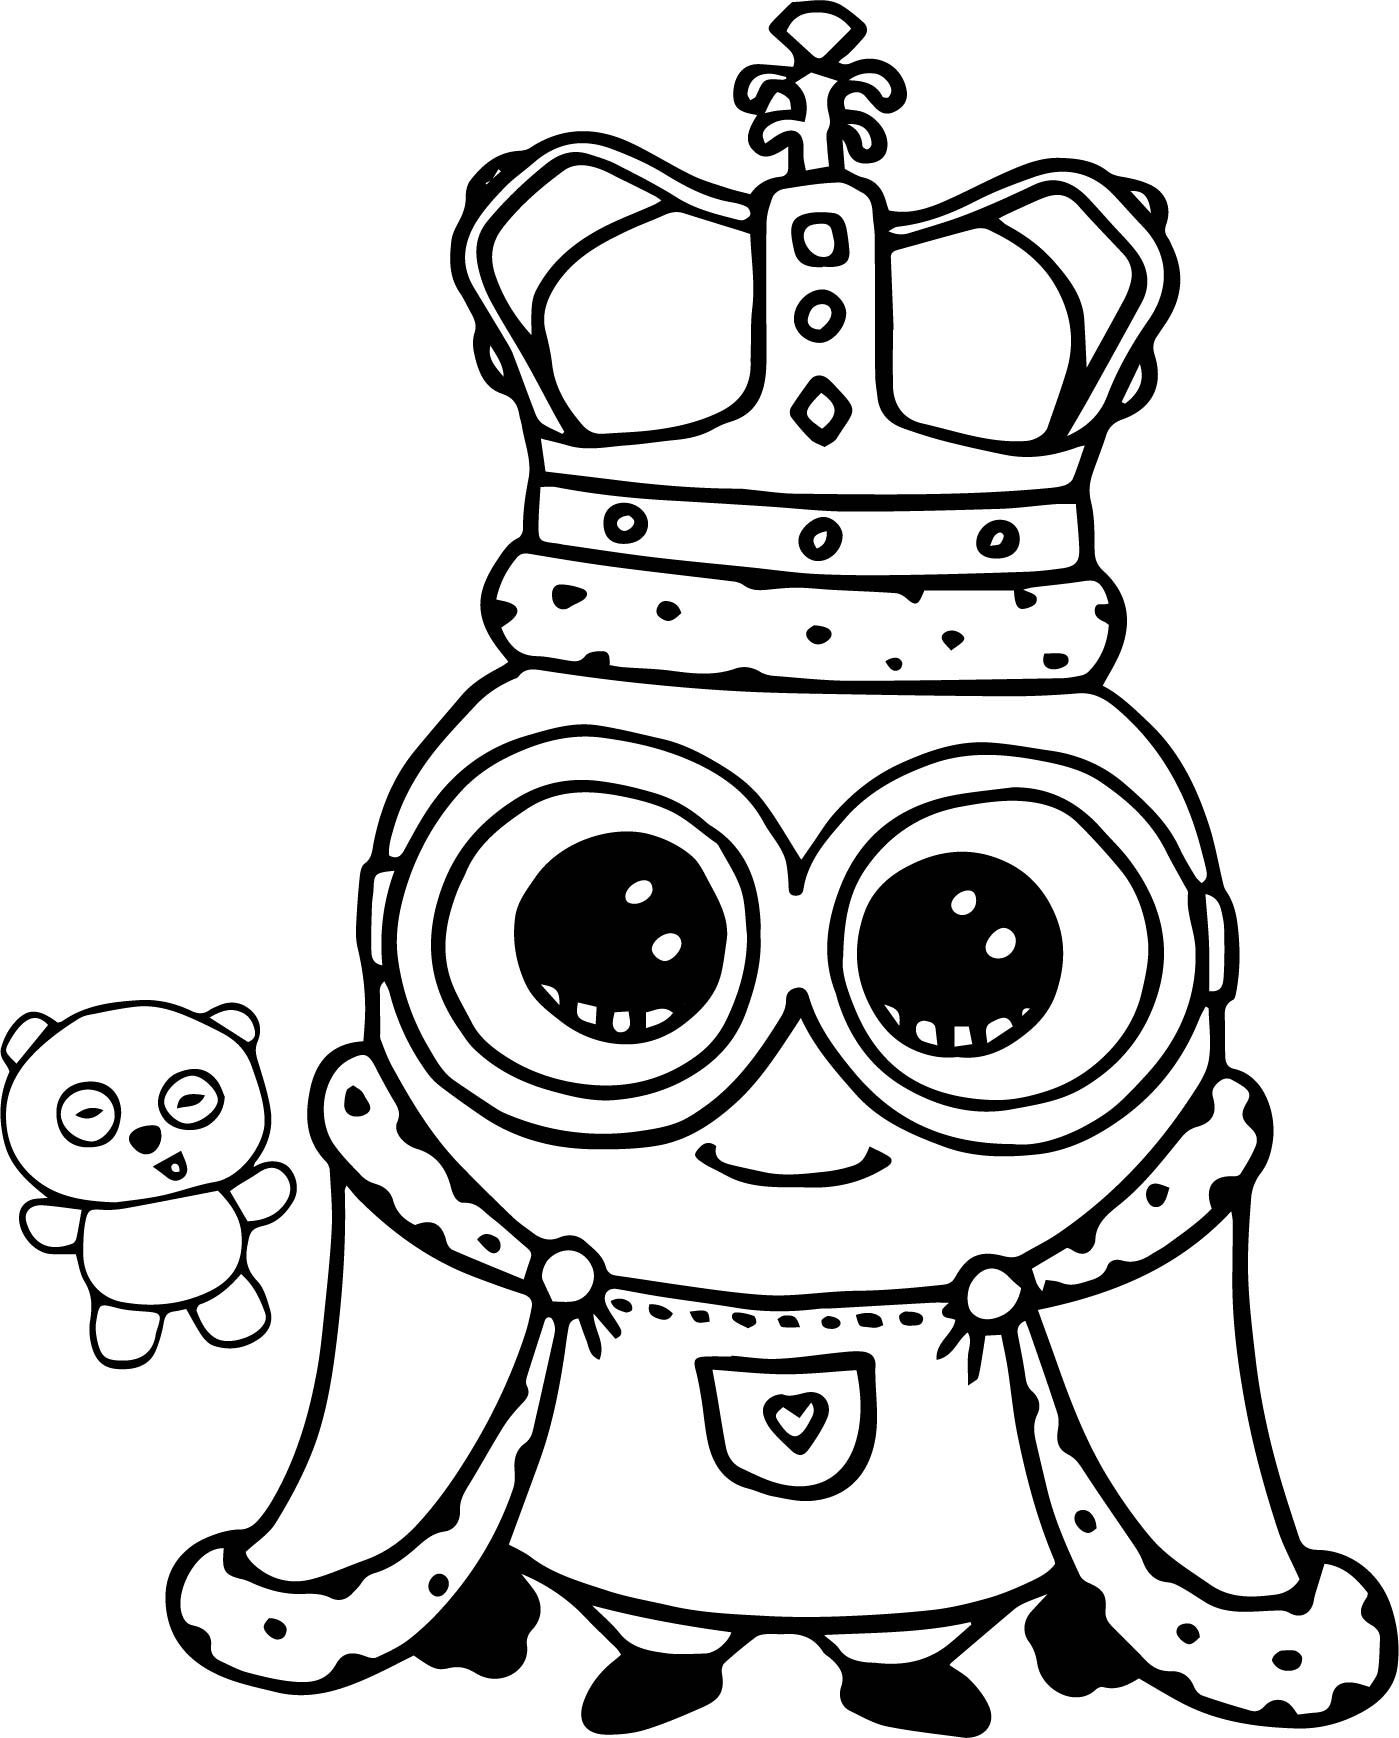 Free Printable Minion Coloring Pages
 Cute Coloring Pages Best Coloring Pages For Kids